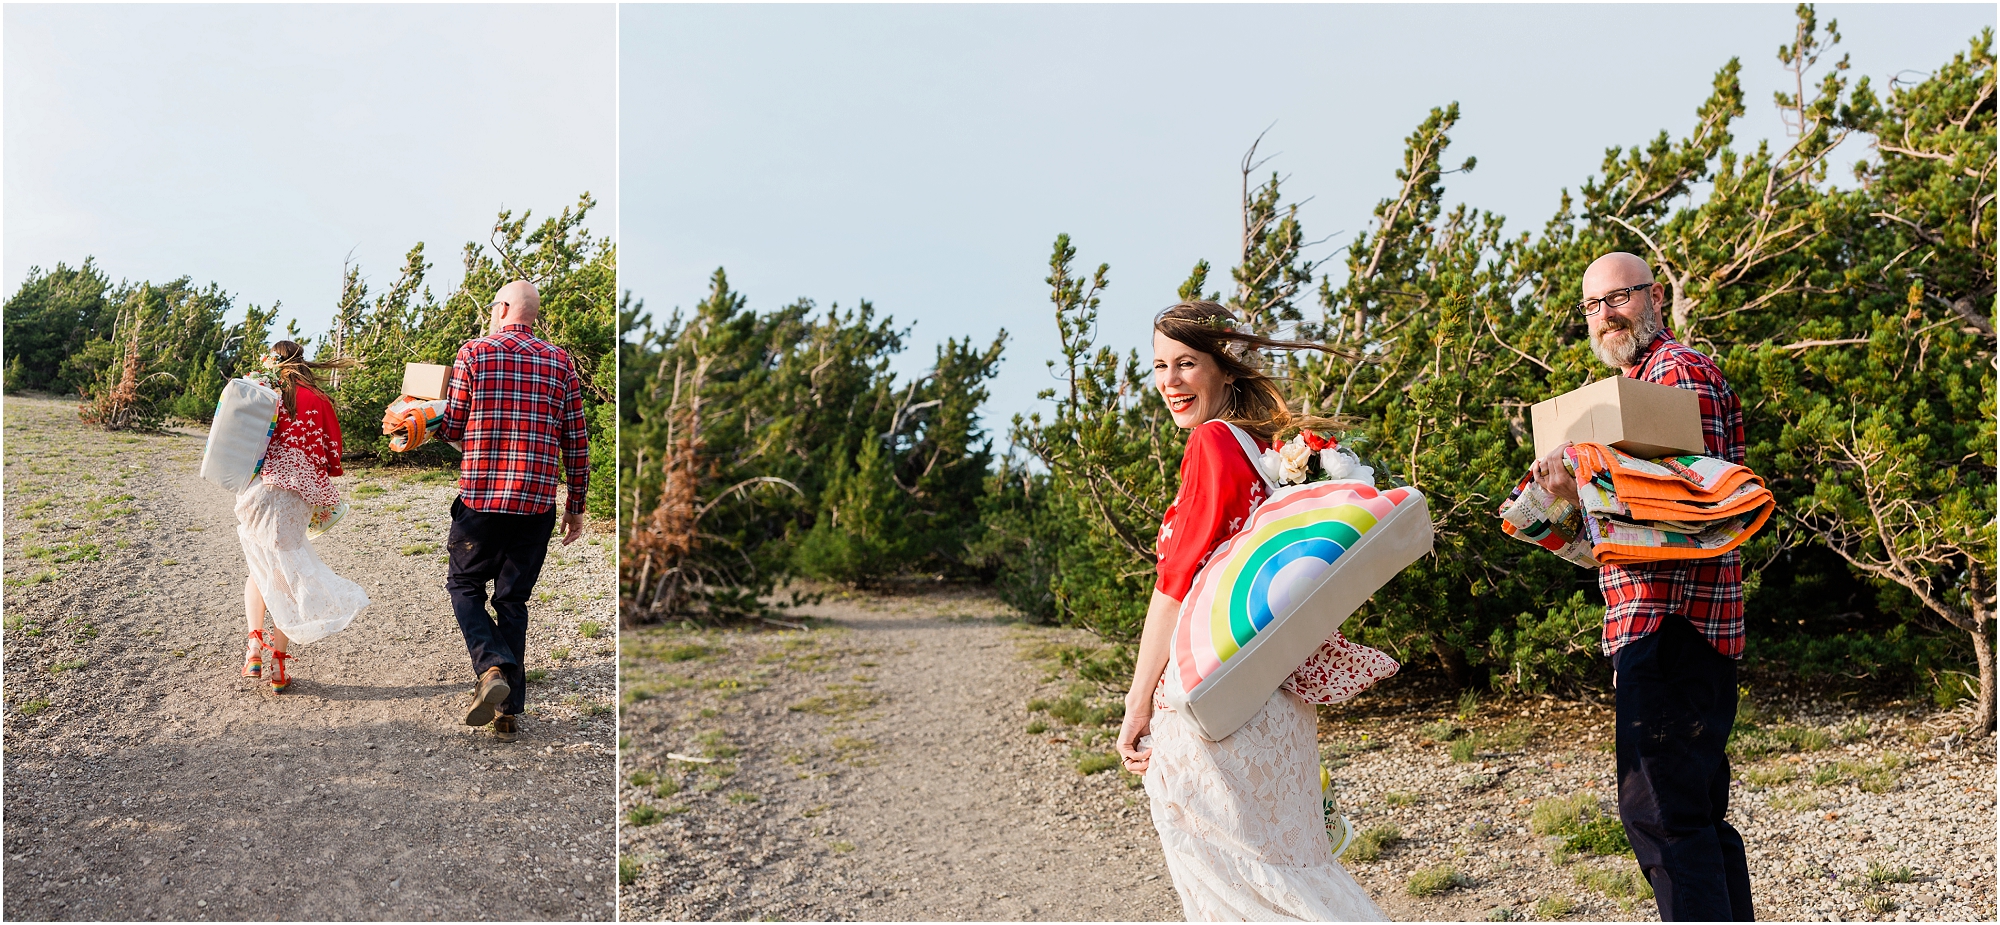 A wedding couple walks through the windswept pine trees on their way to set up a picnic celebration of champagne, cake and strawberries after their intimate ceremony in Crater Lake National Park in Oregon. | Erica Swantek Photography